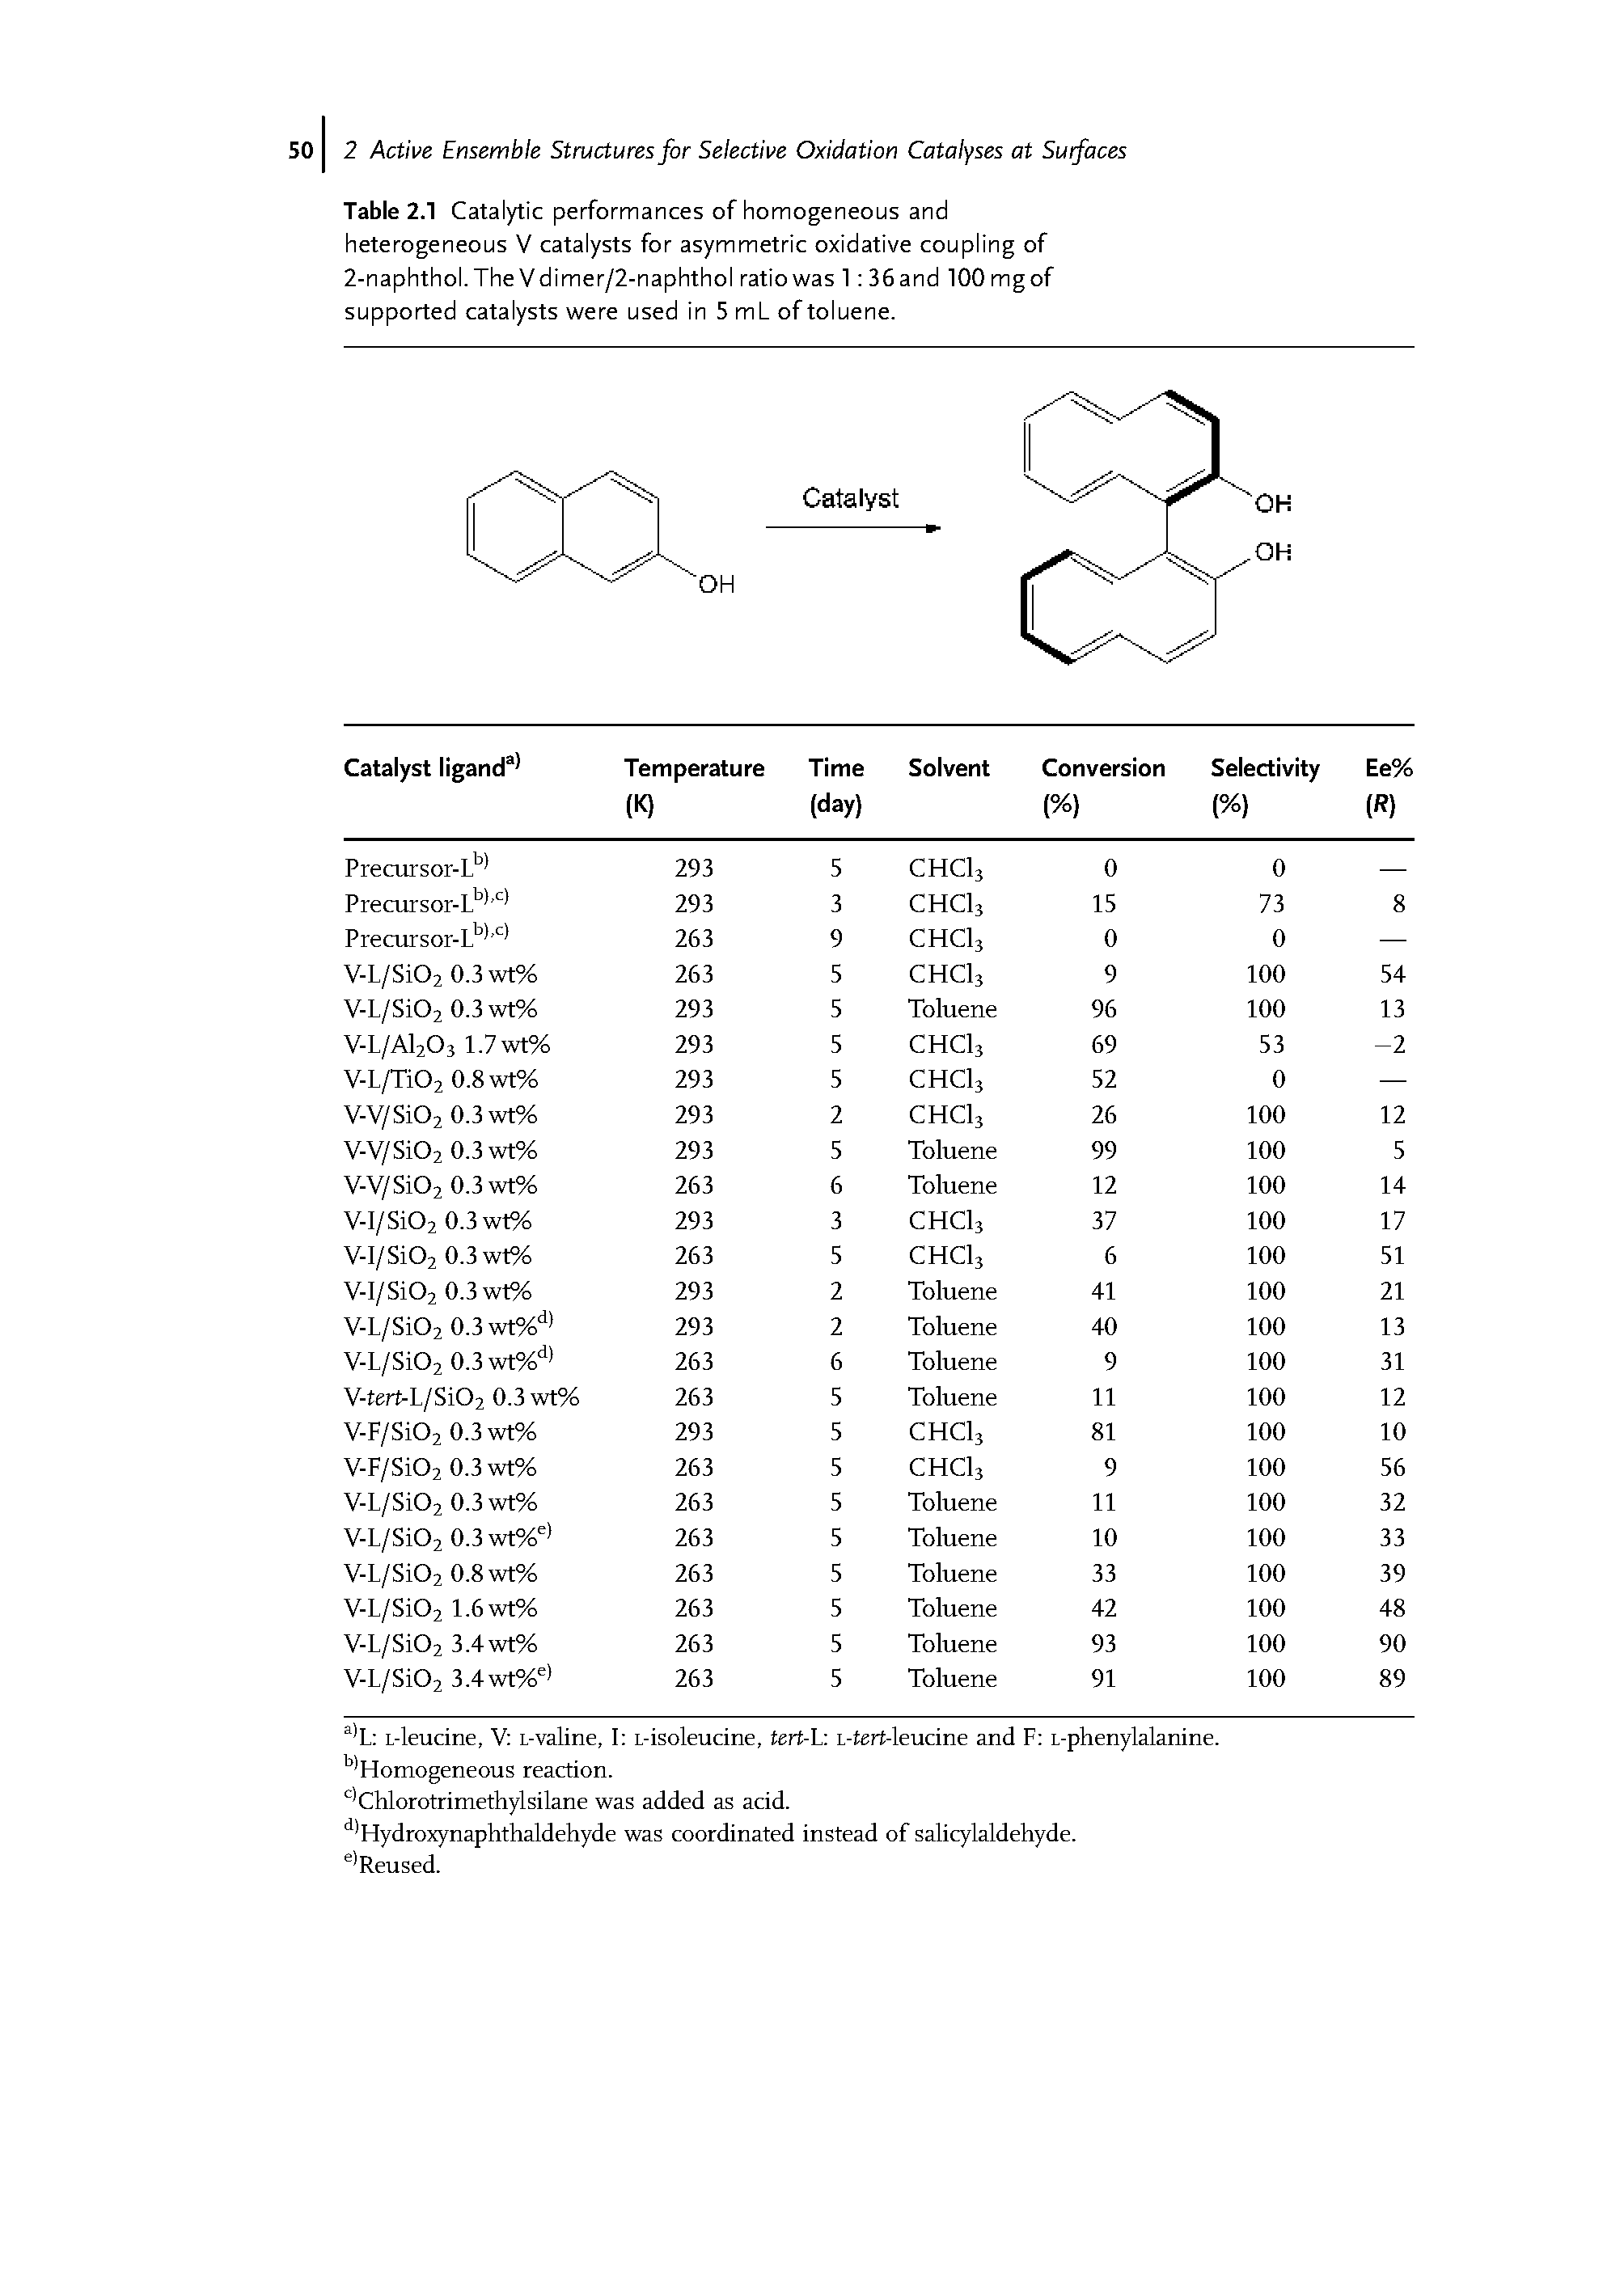 Table 2.1 Catalytic performances of homogeneous and heterogeneous V catalysts for asymmetric oxidative coupling of 2-naphthol. The Vdimer/2-naphthol ratio was 1 36 and 100 mg of supported catalysts were used in 5 ml of toluene.